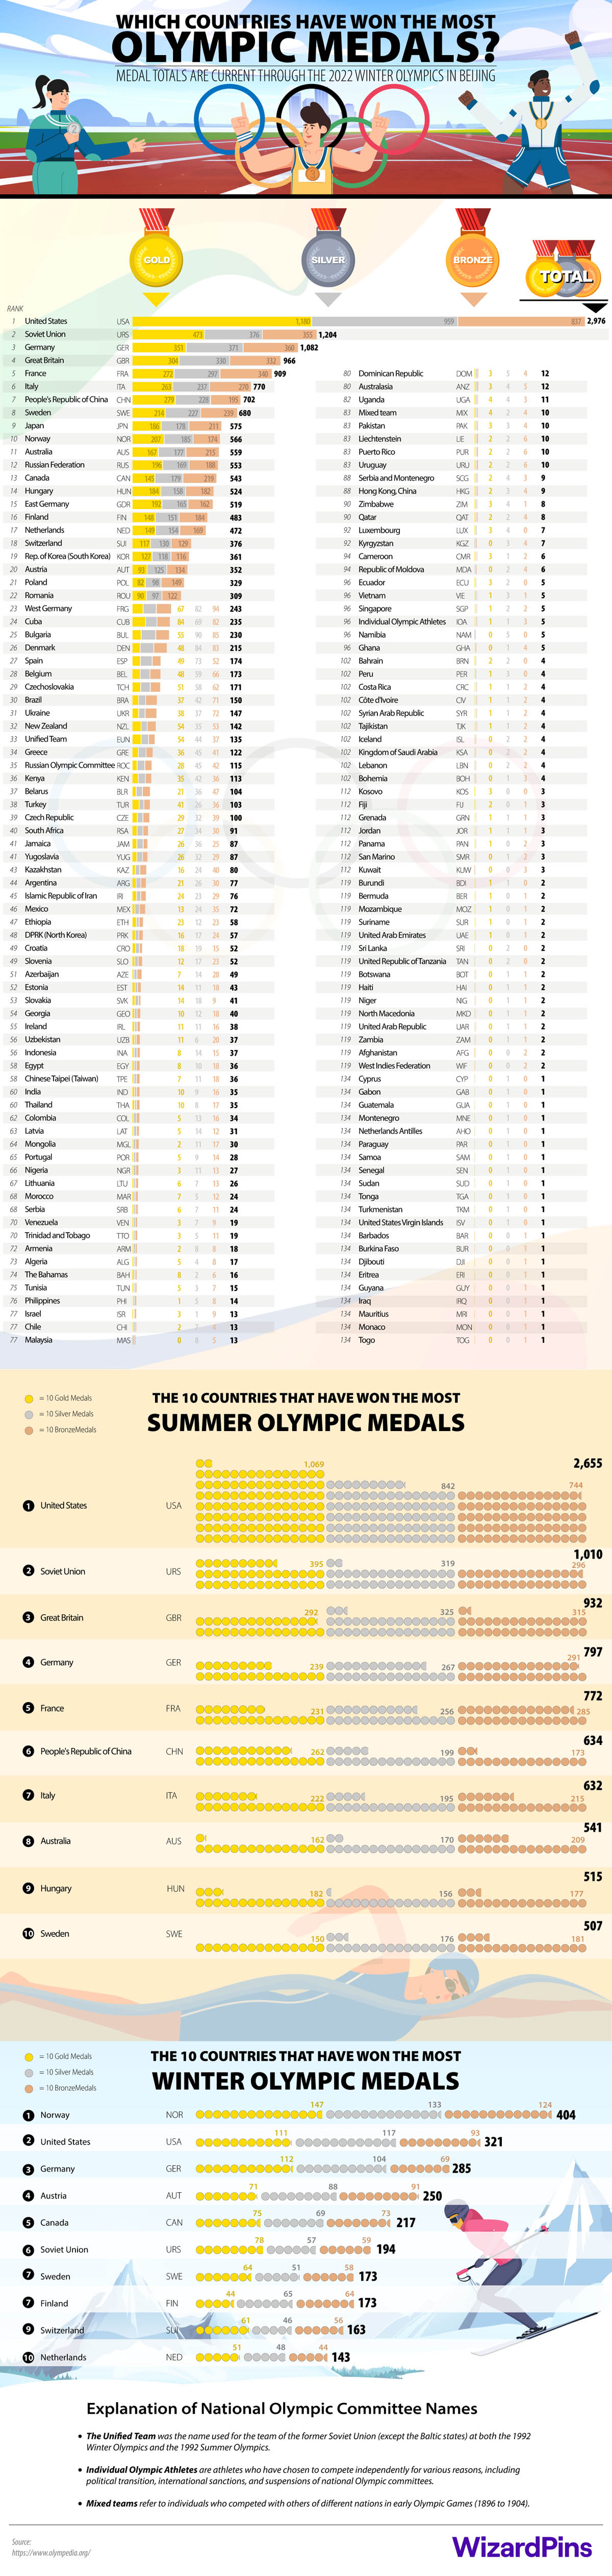 Which Countries Have Won the Most Olympic Medals?